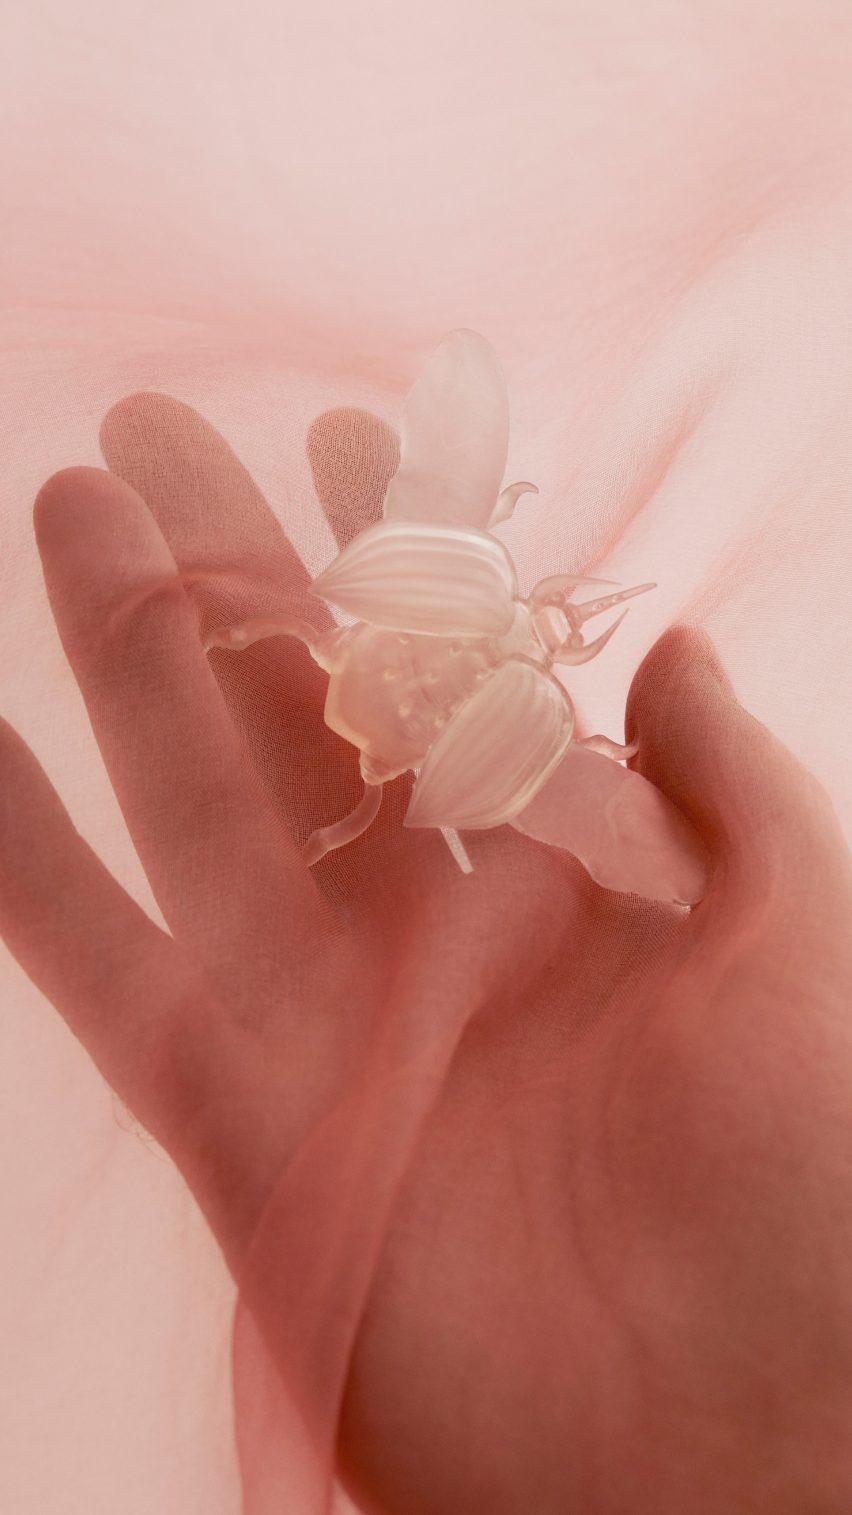 Hand holding translucent 3D-printed beetle